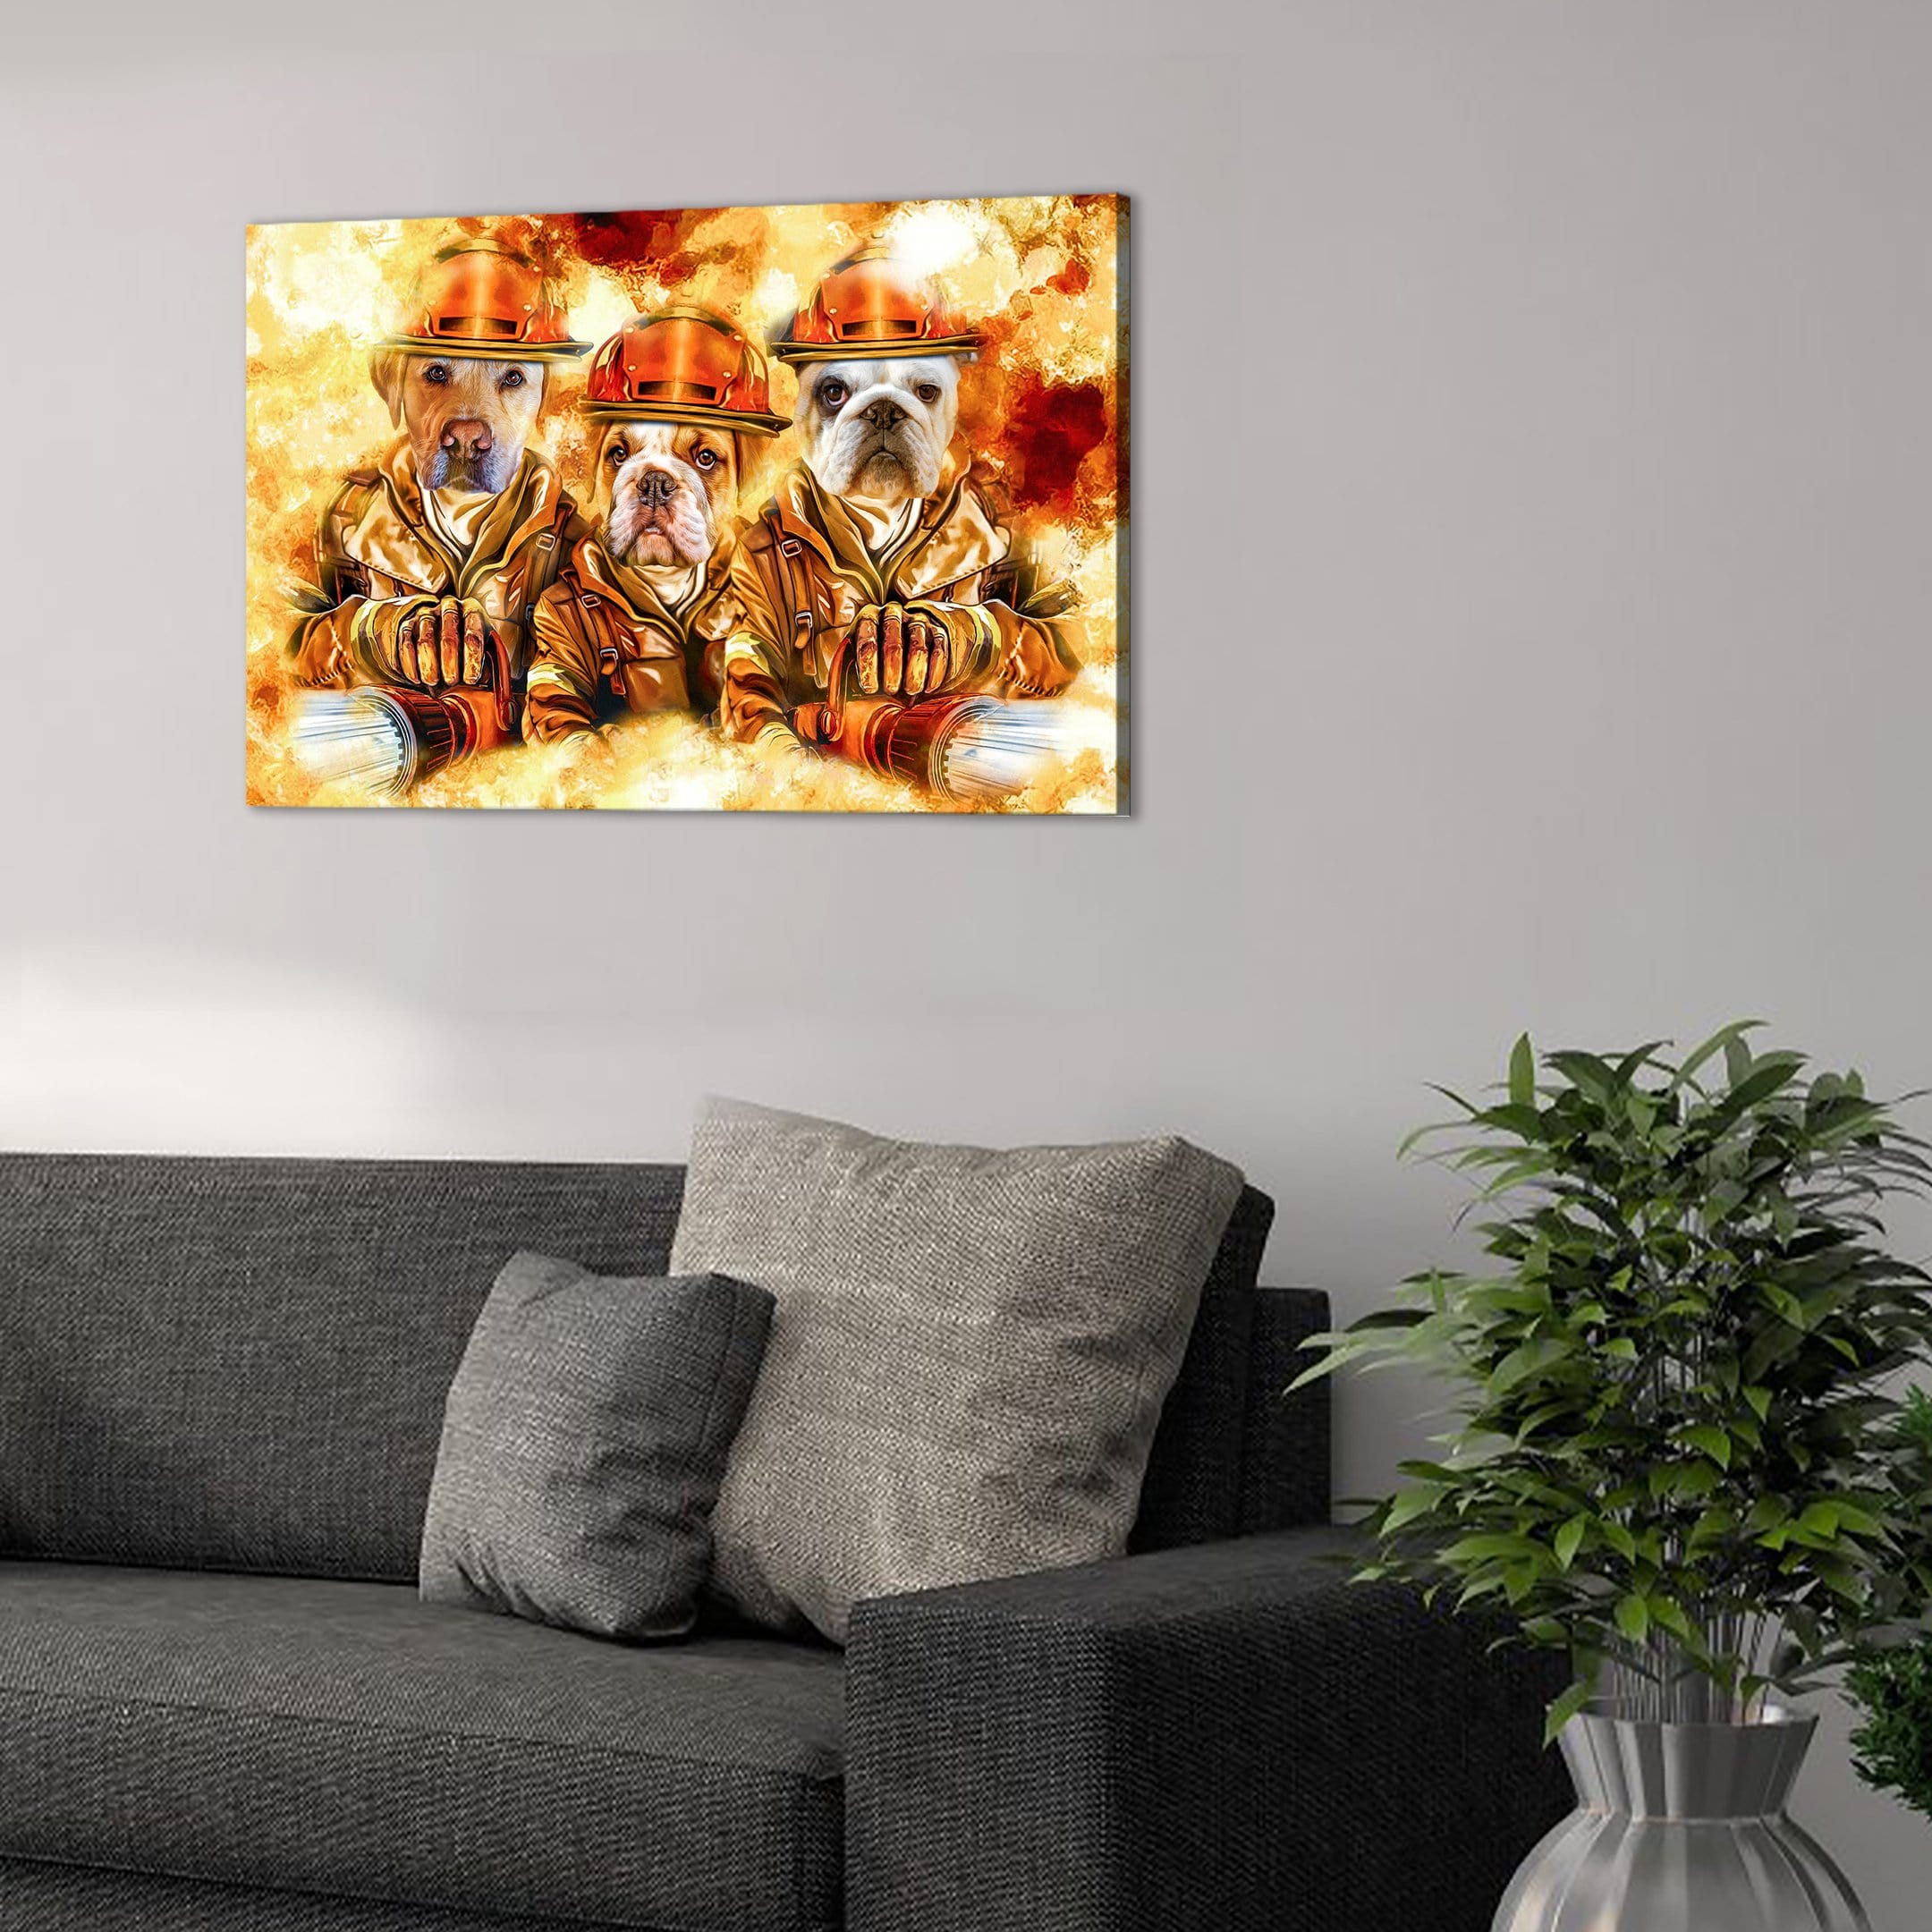 &#39;The Firefighters&#39; Personalized 3 Pet Canvas